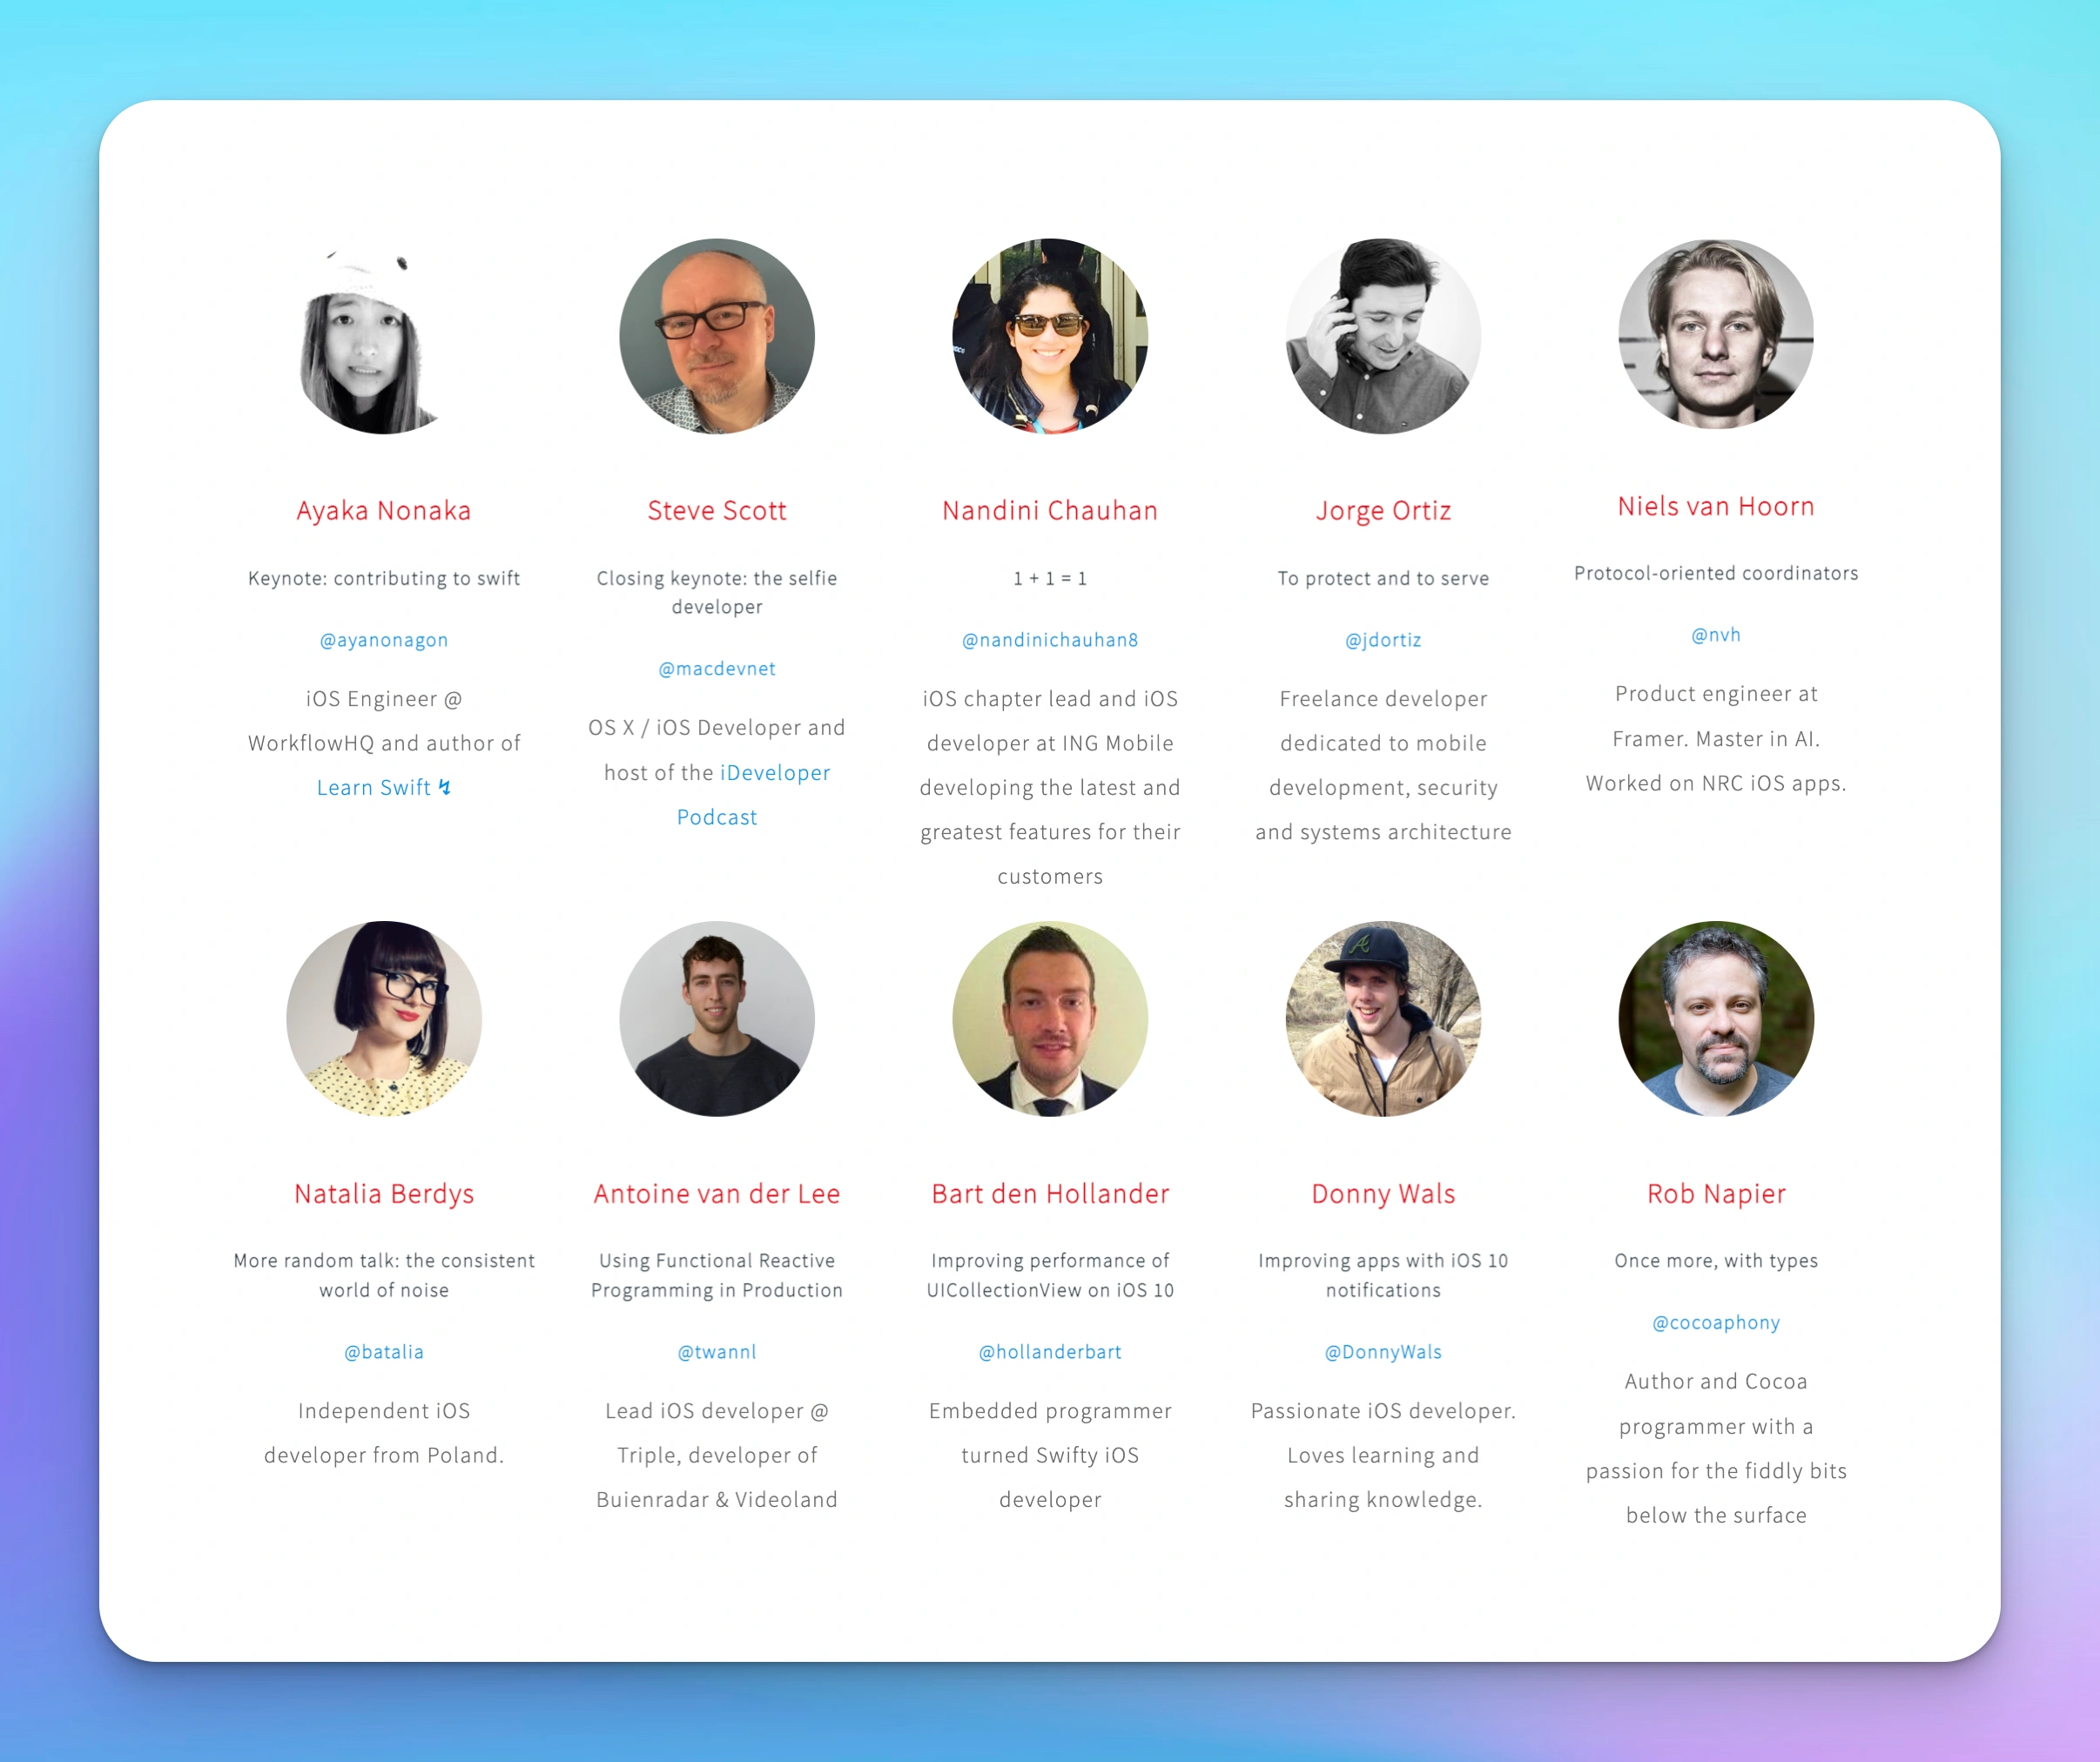 The 2016 speaker line-up of Do iOS.